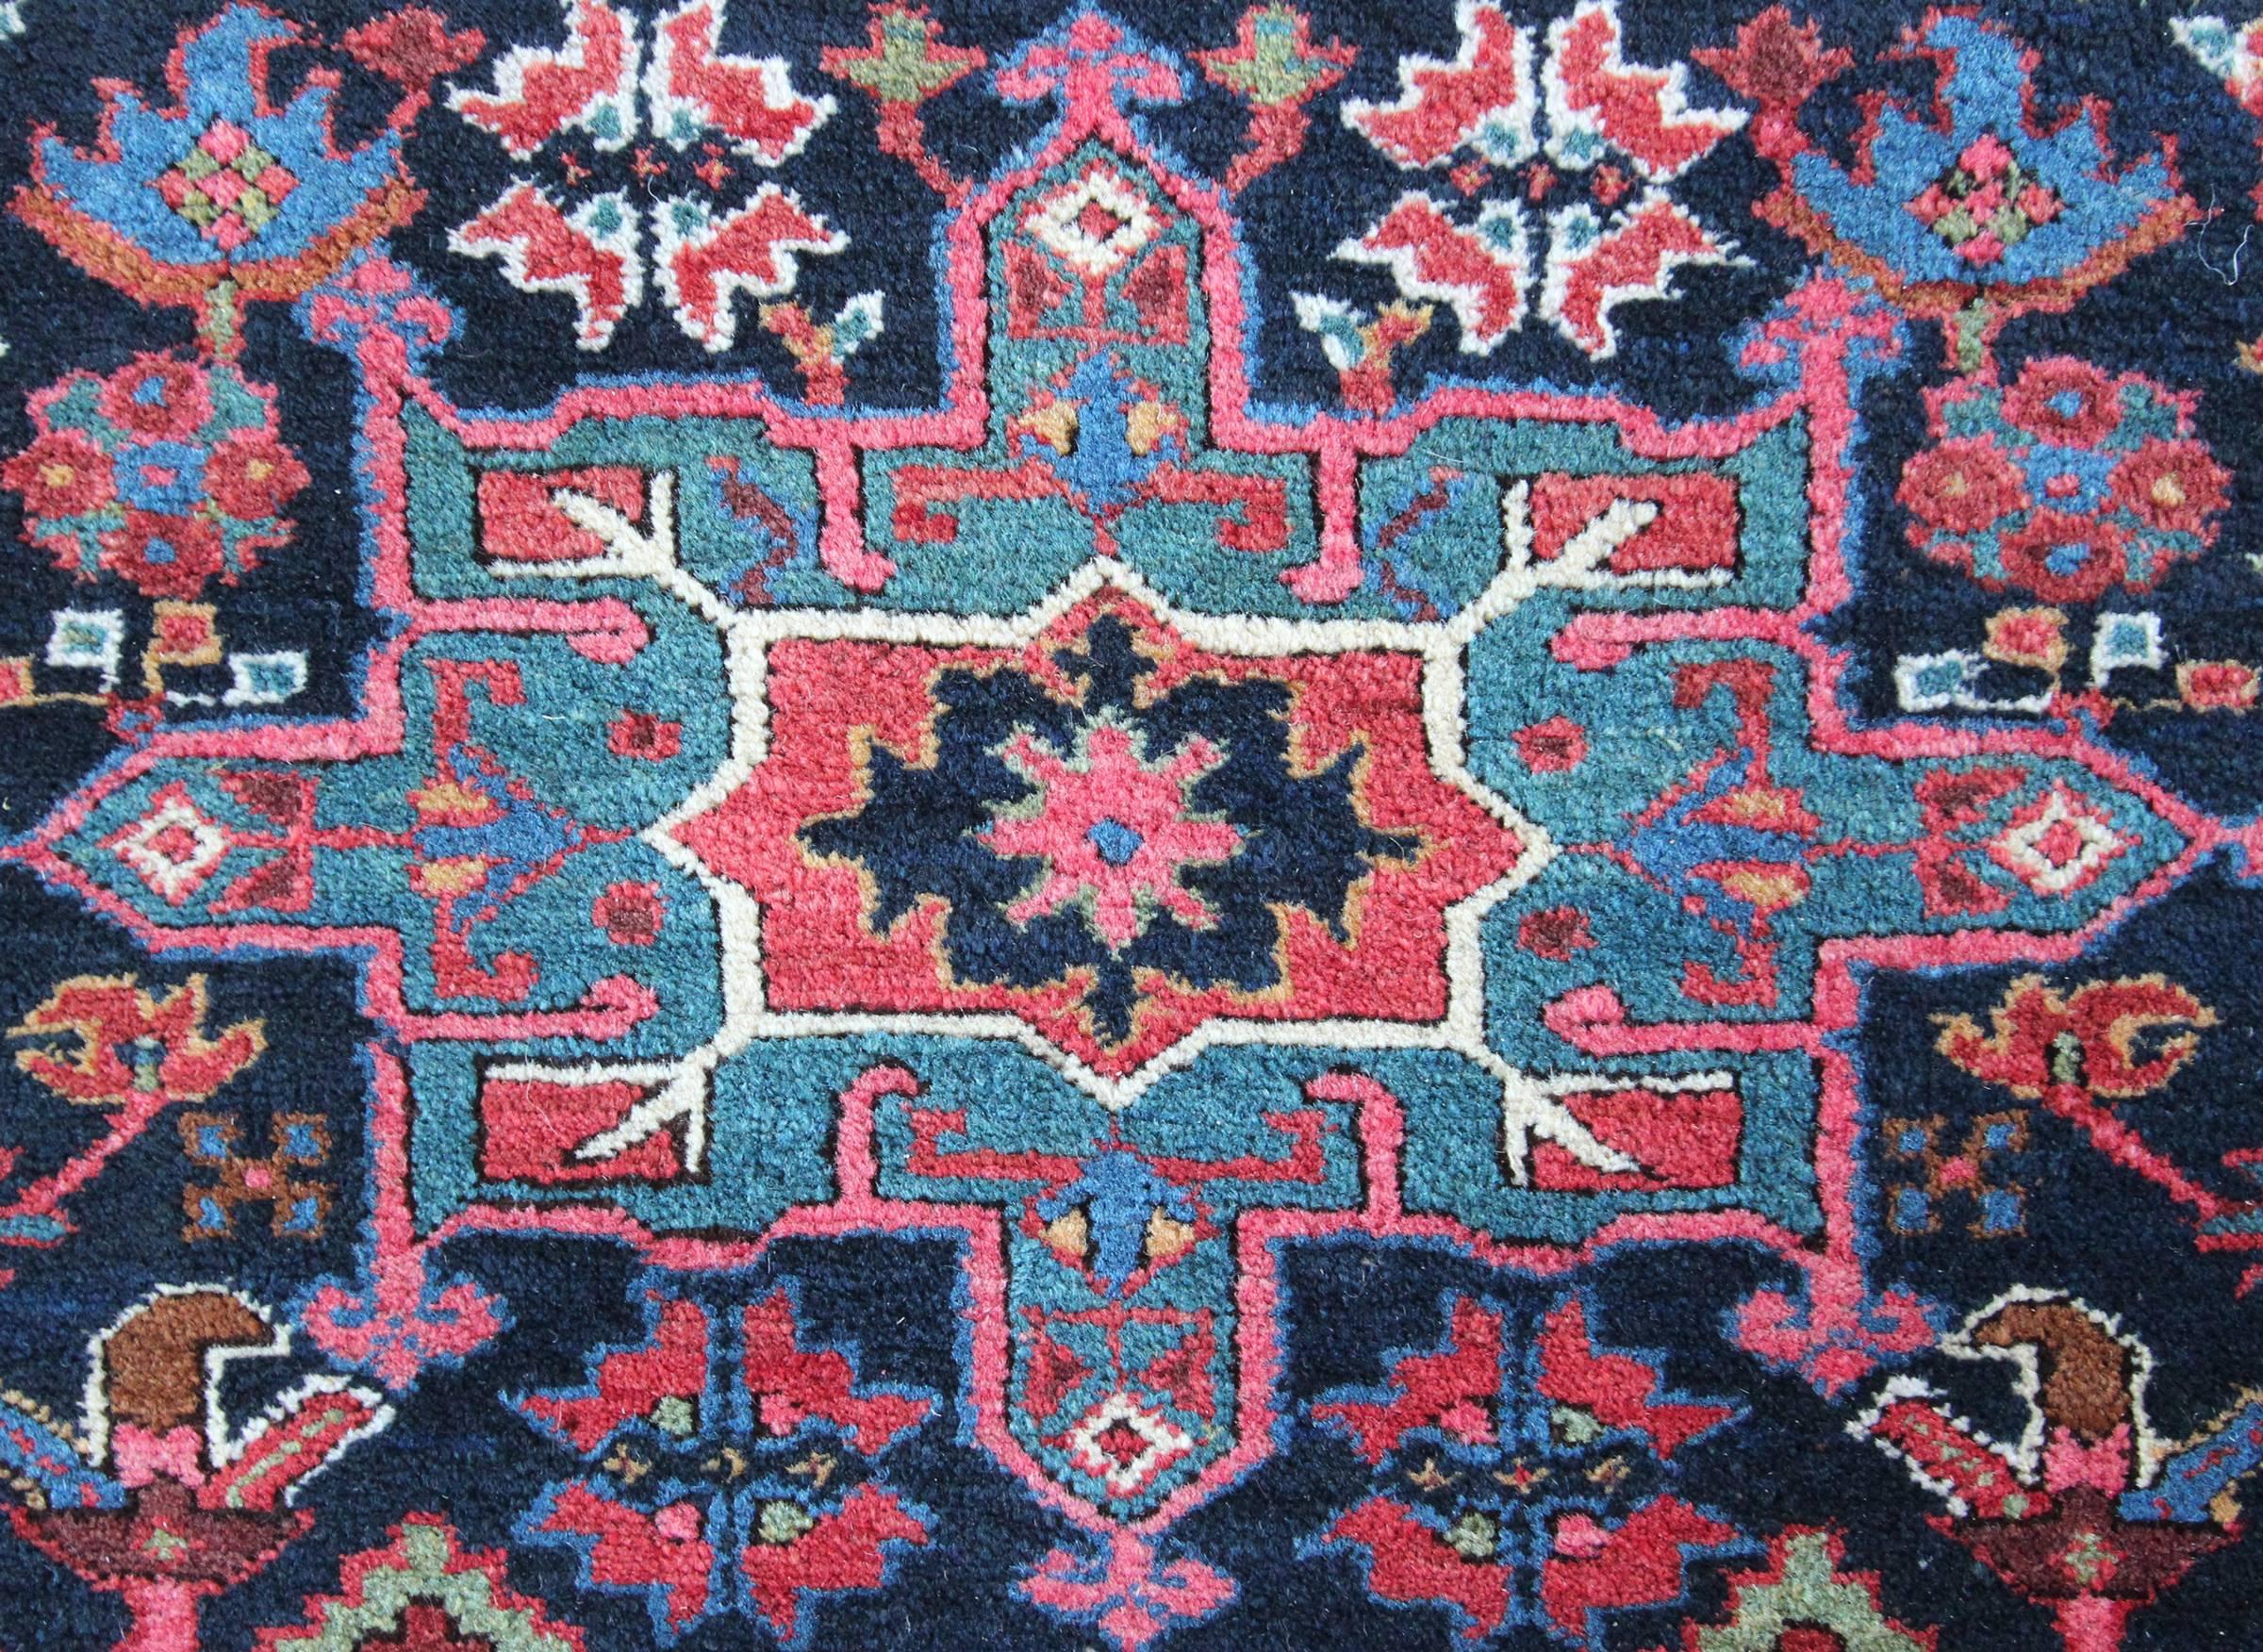 Stunning antique Hamadan rug, woven in north Persia around circa 1900-1910 in exceptional condition all-over and an unusual antique Karaja design. The variety and depth of color is fantastic! The subtle changes in the green eight-pointed star motifs